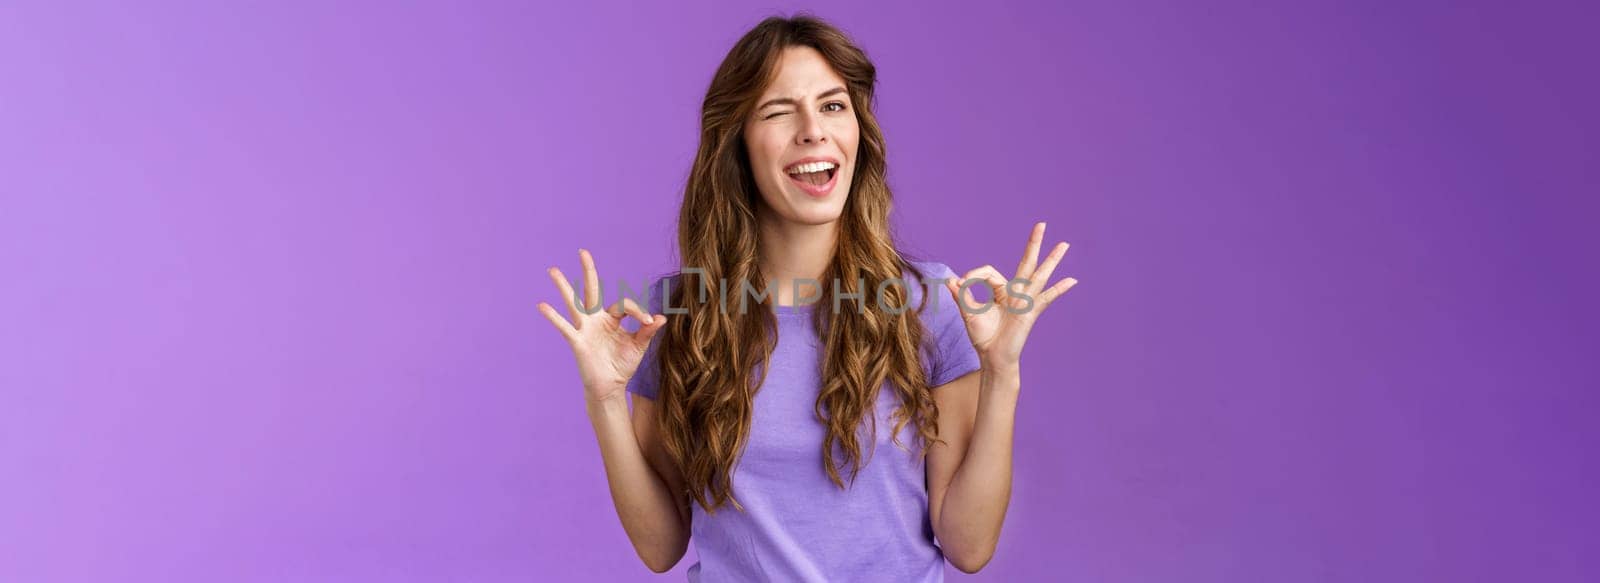 Got it relax everything perfect. Relaxed carefree curly girl winking cheeky smiling cunning show okay ok ring sign assure all good stand satisfied accepting great choice approving purple background.